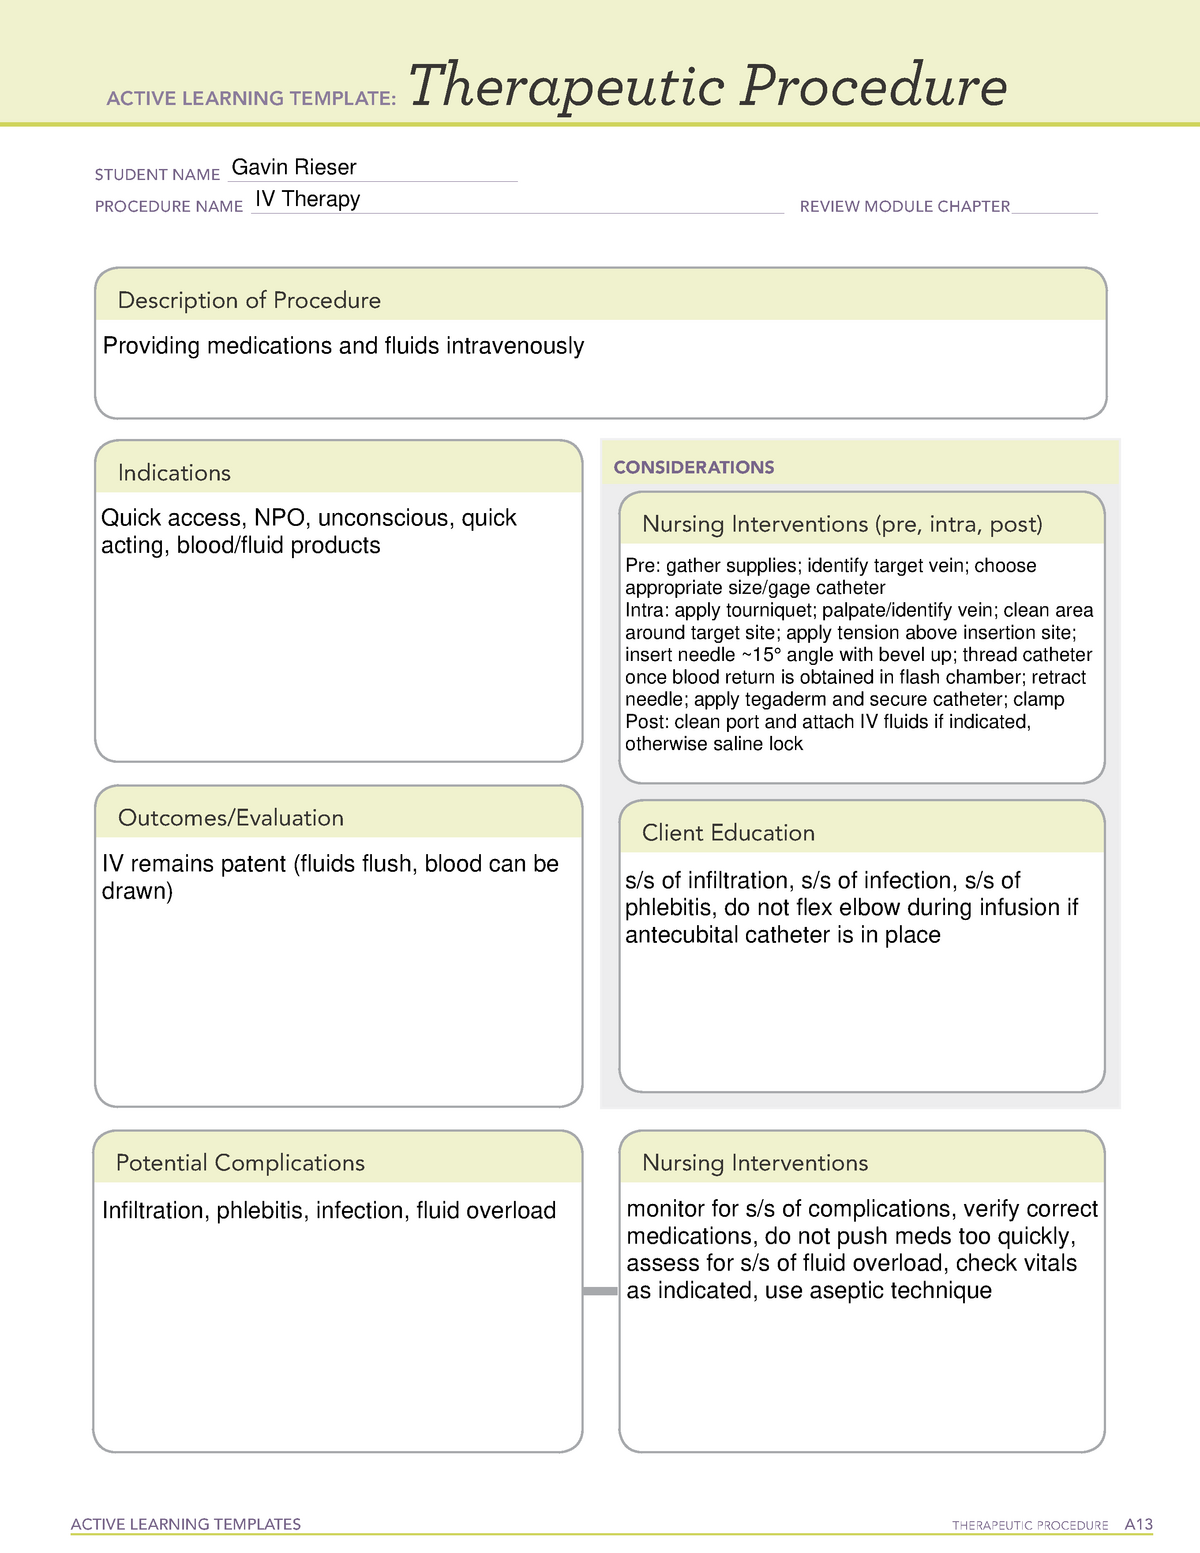 ATI Therapeutic IV therapy ACTIVE LEARNING TEMPLATES THERAPEUTIC